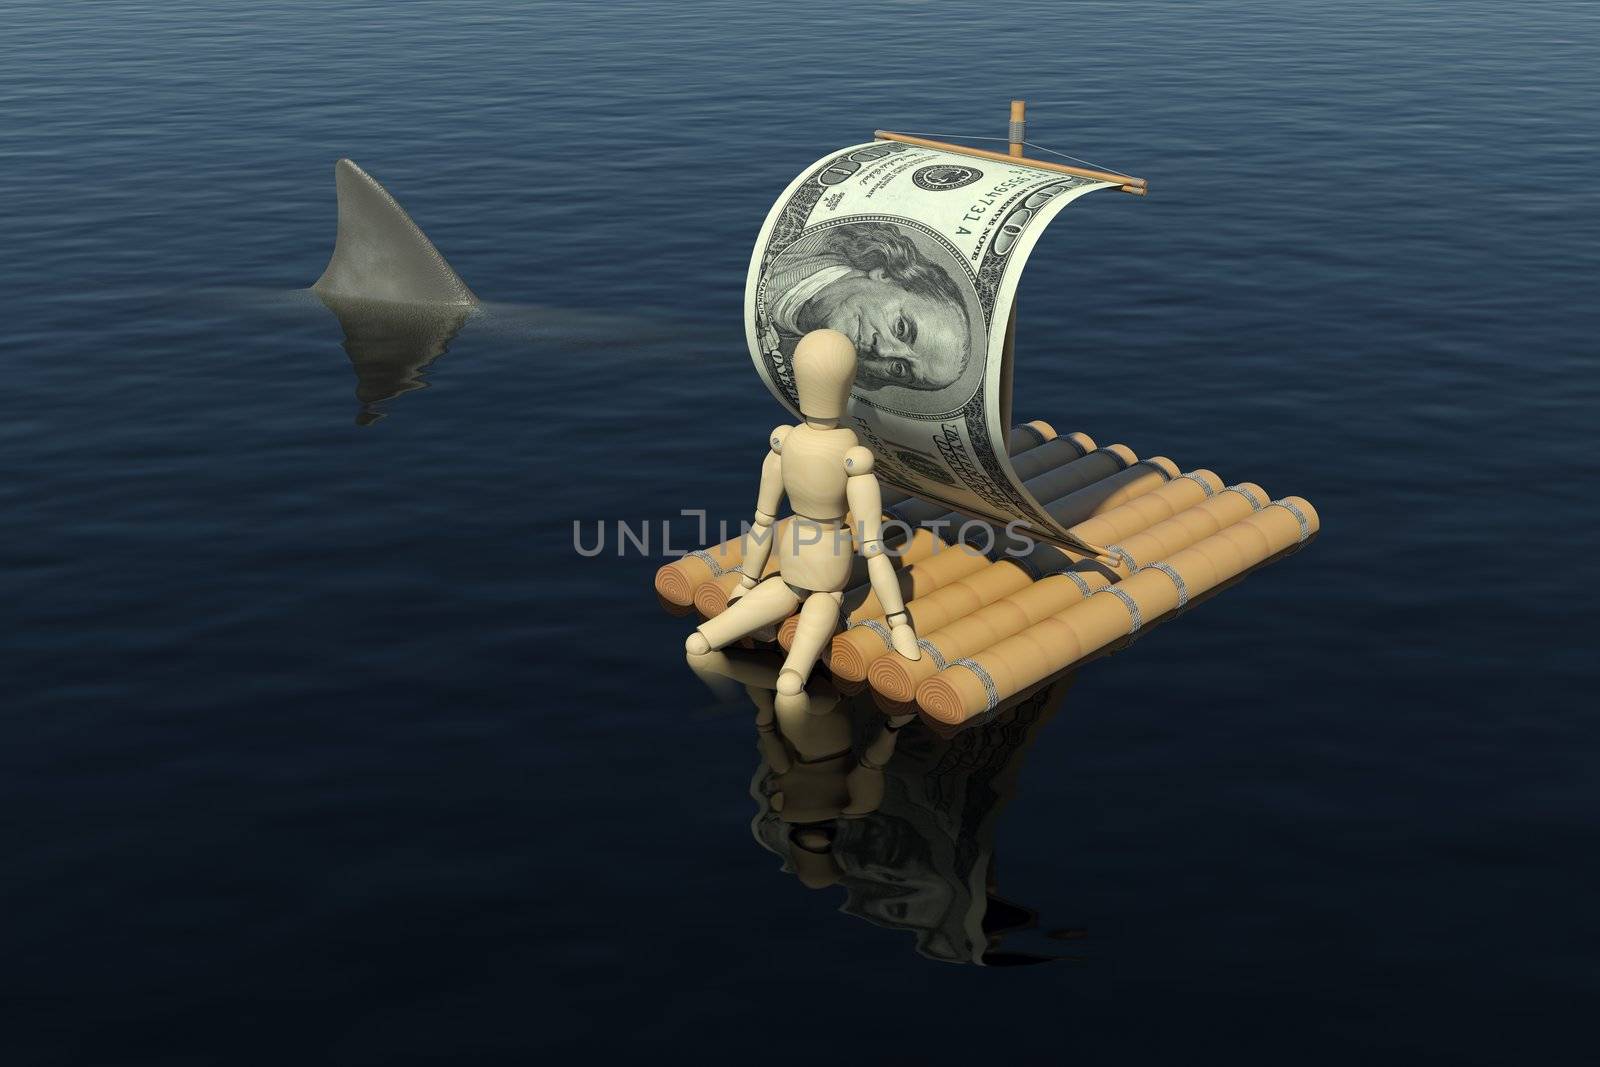 The wooden man floats on a raft with a sail from the dollar by cherezoff